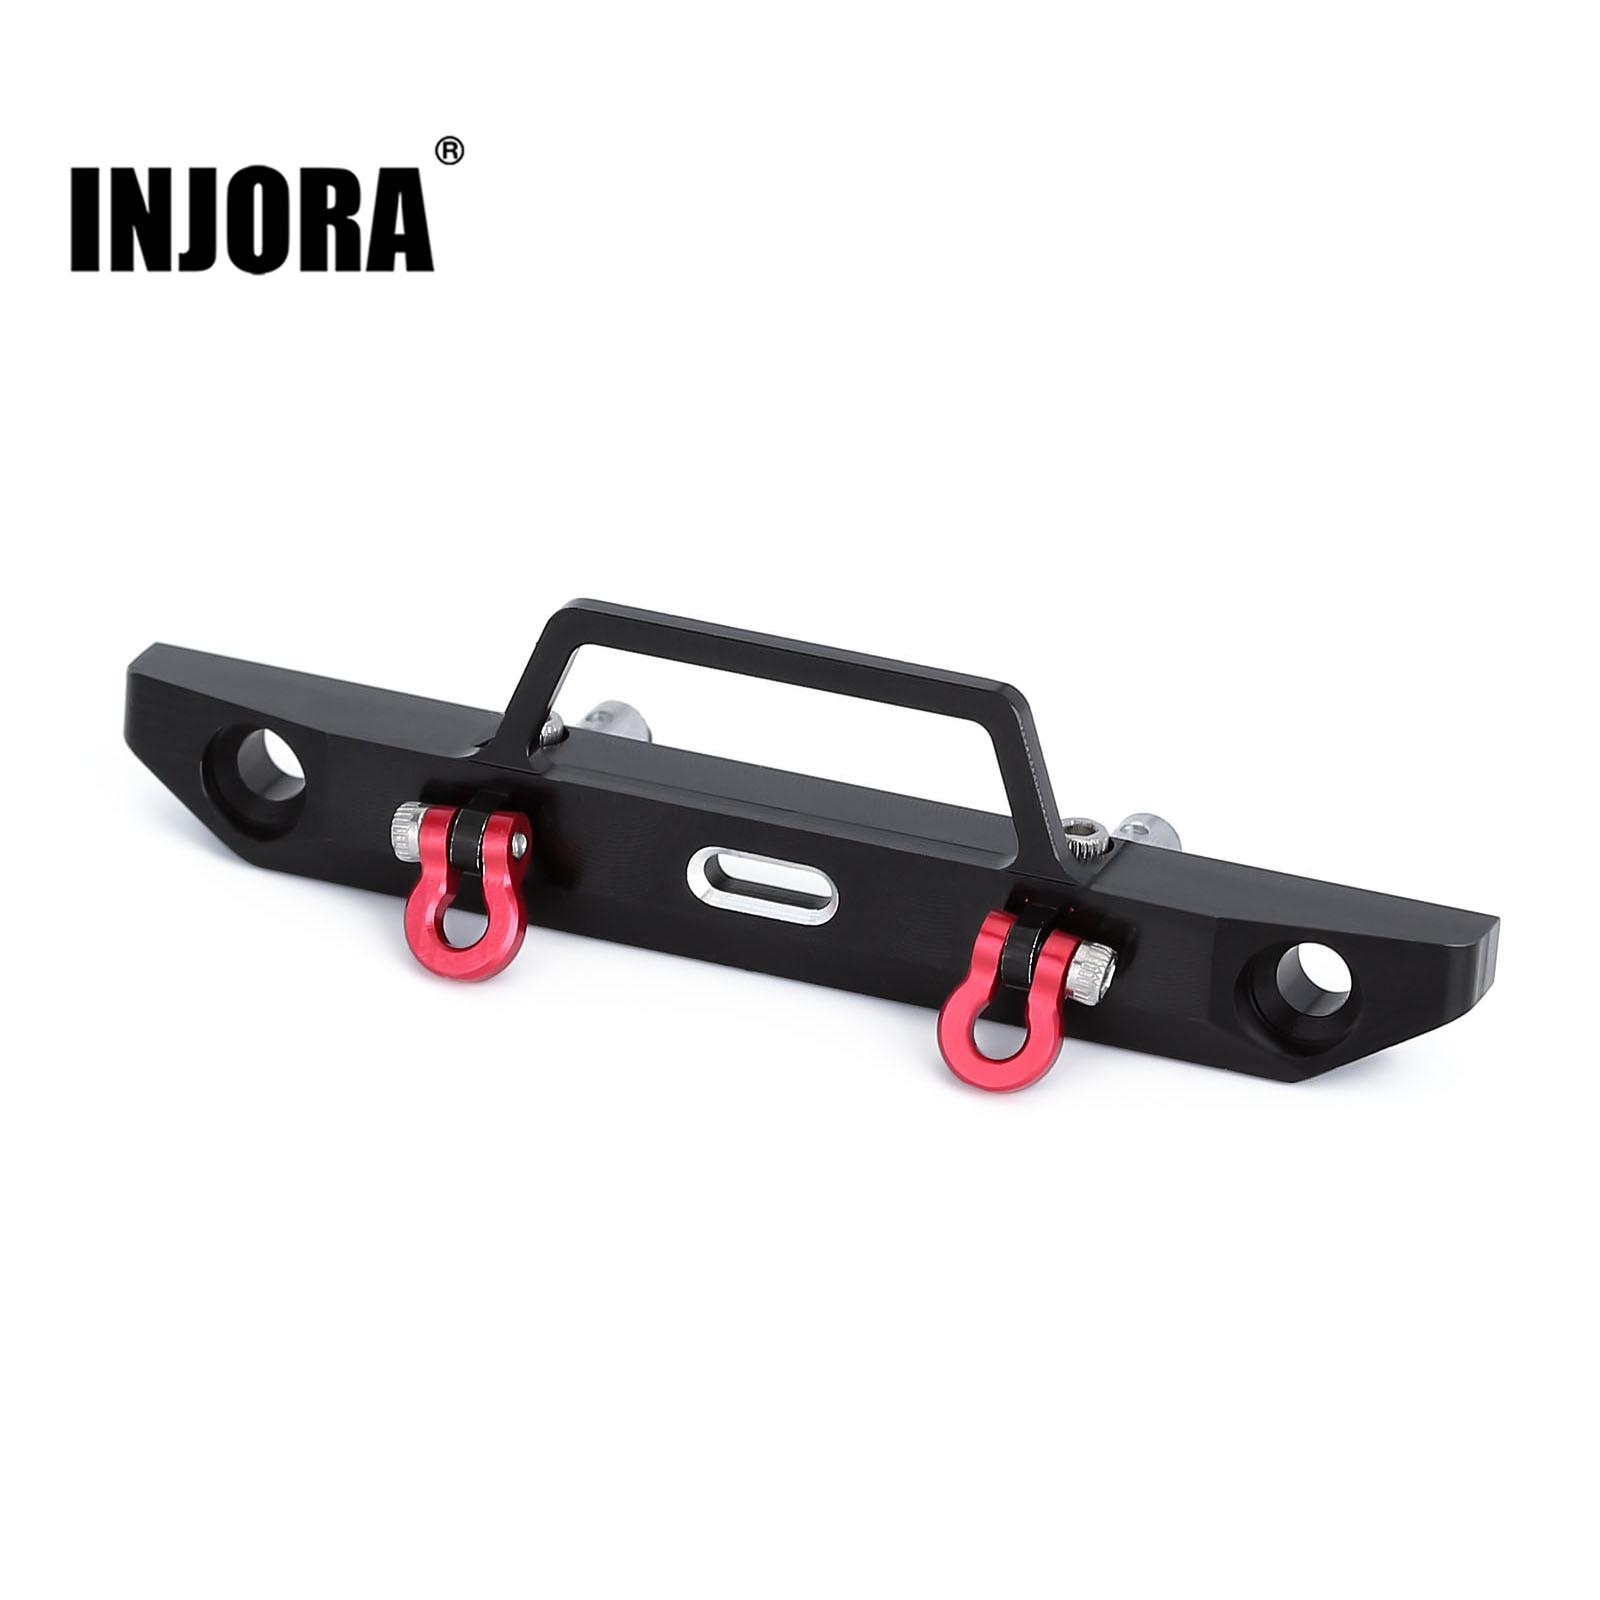 INJORA-58-15mm-Metal-Front-Bumper-with-Hook-for-1-24-RC-Crawler-Car-Axial-SCX24.jpg